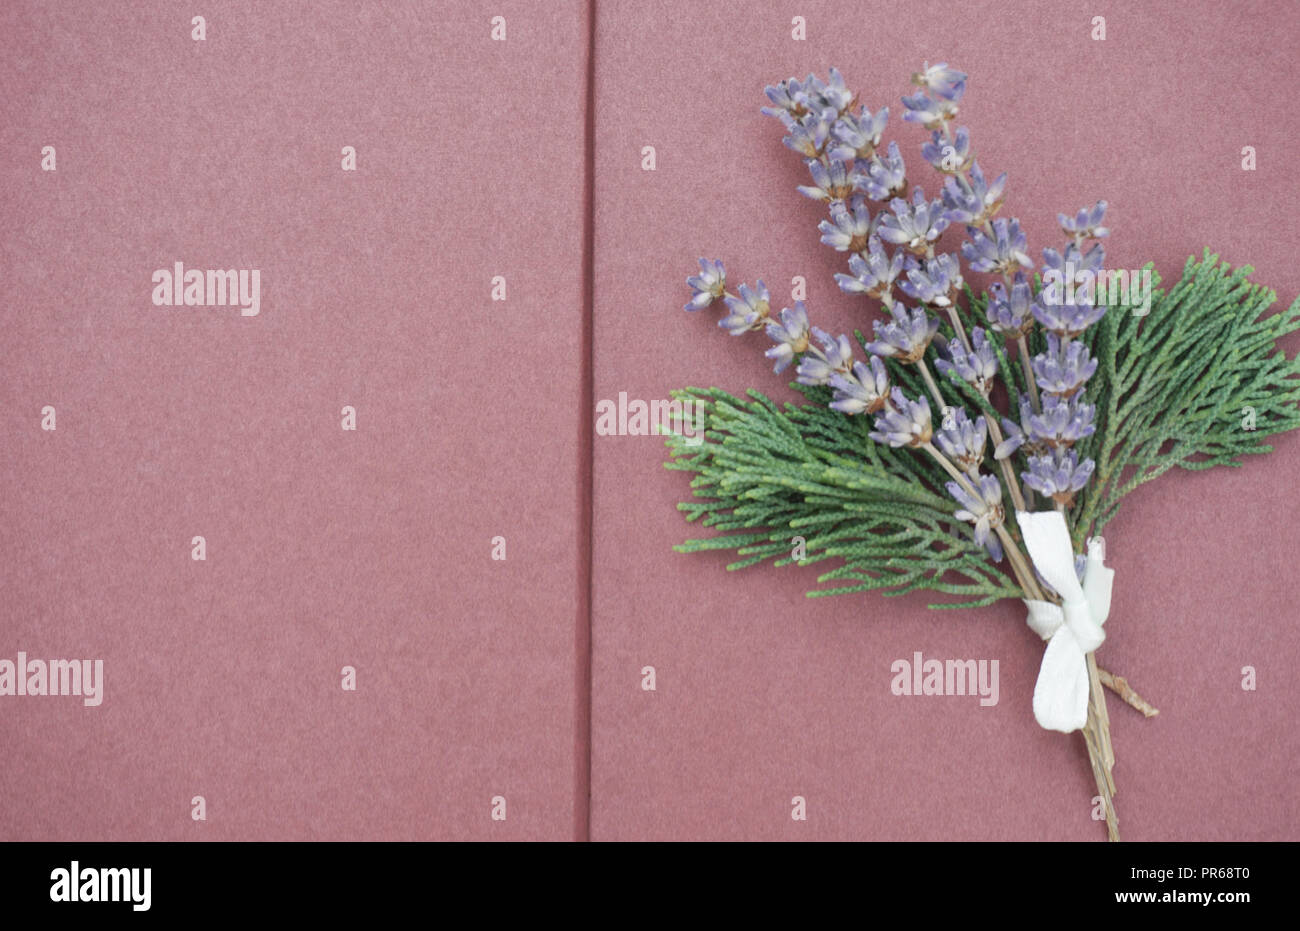 Open blank pages of scrapbook with bunch of lilac lavender and green branches on the right side. Free copy space for text Stock Photo